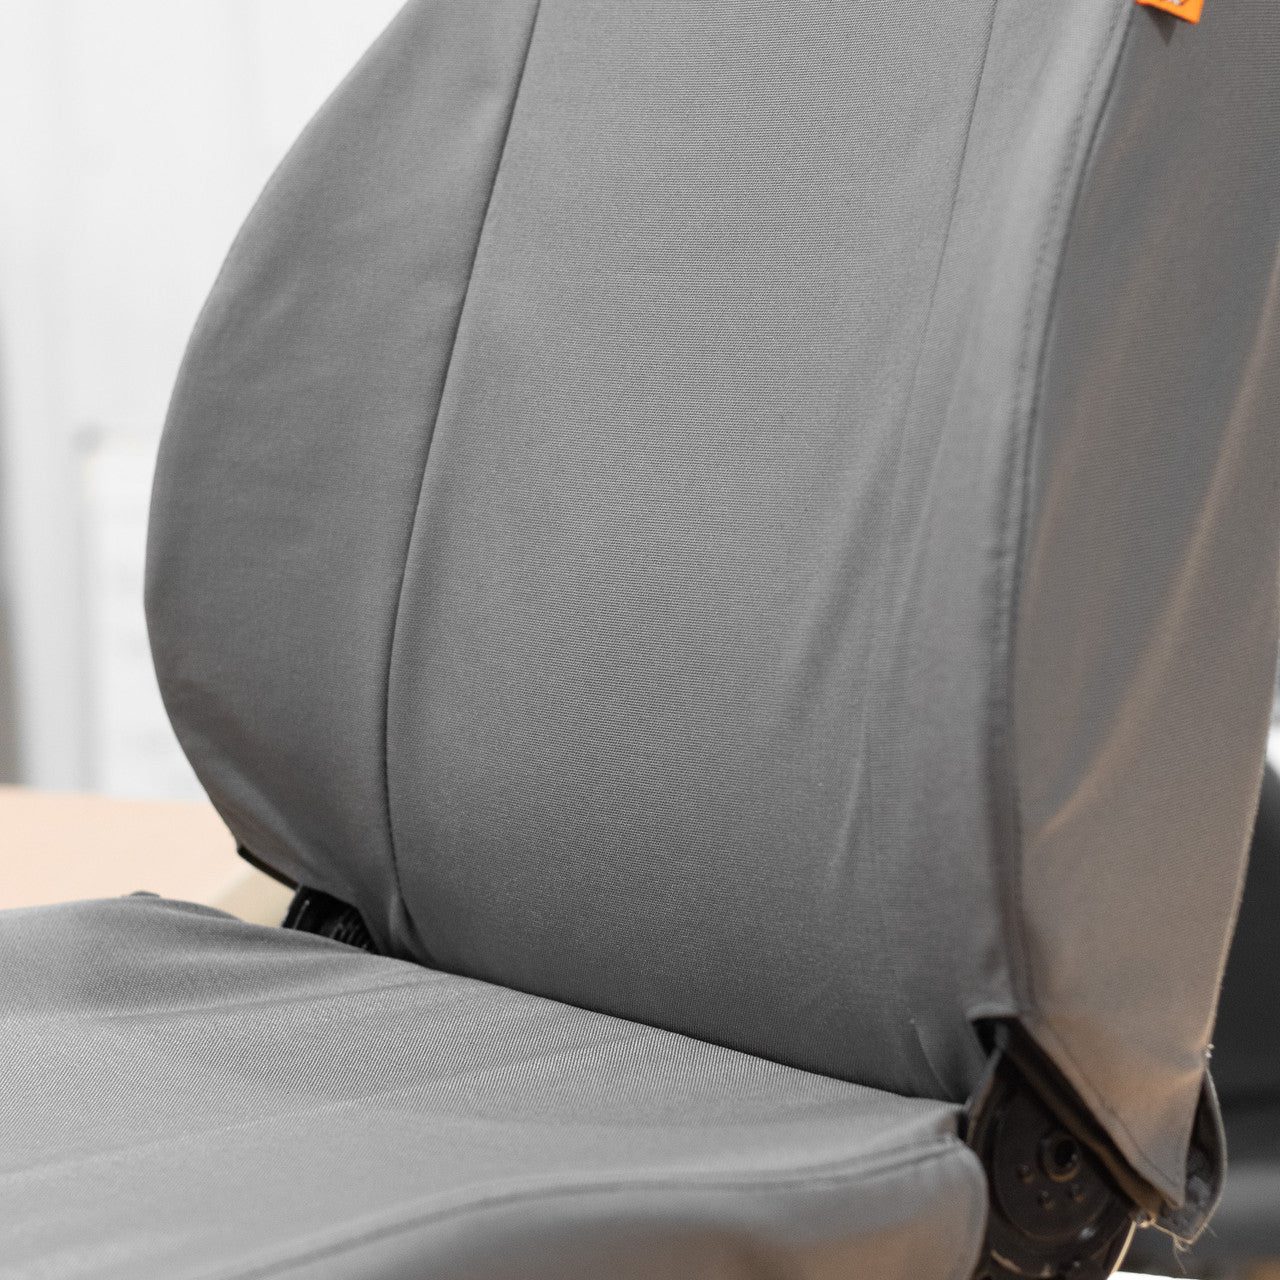 Heavy duty CASE Excavator Seat cover - seat back detail